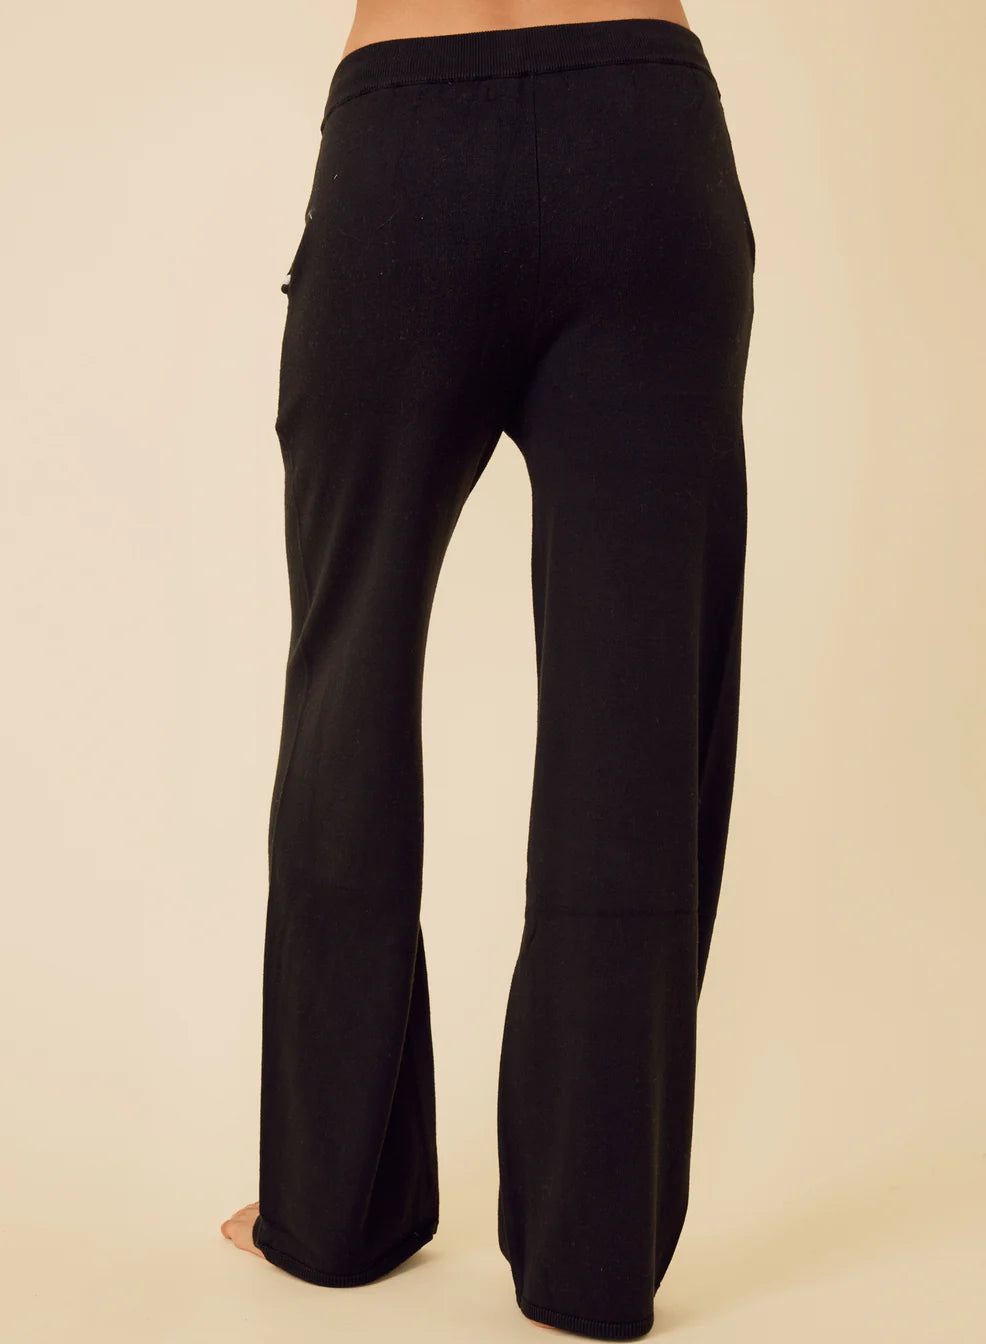 One Grey Day - Bianca Cropped Pant in Black